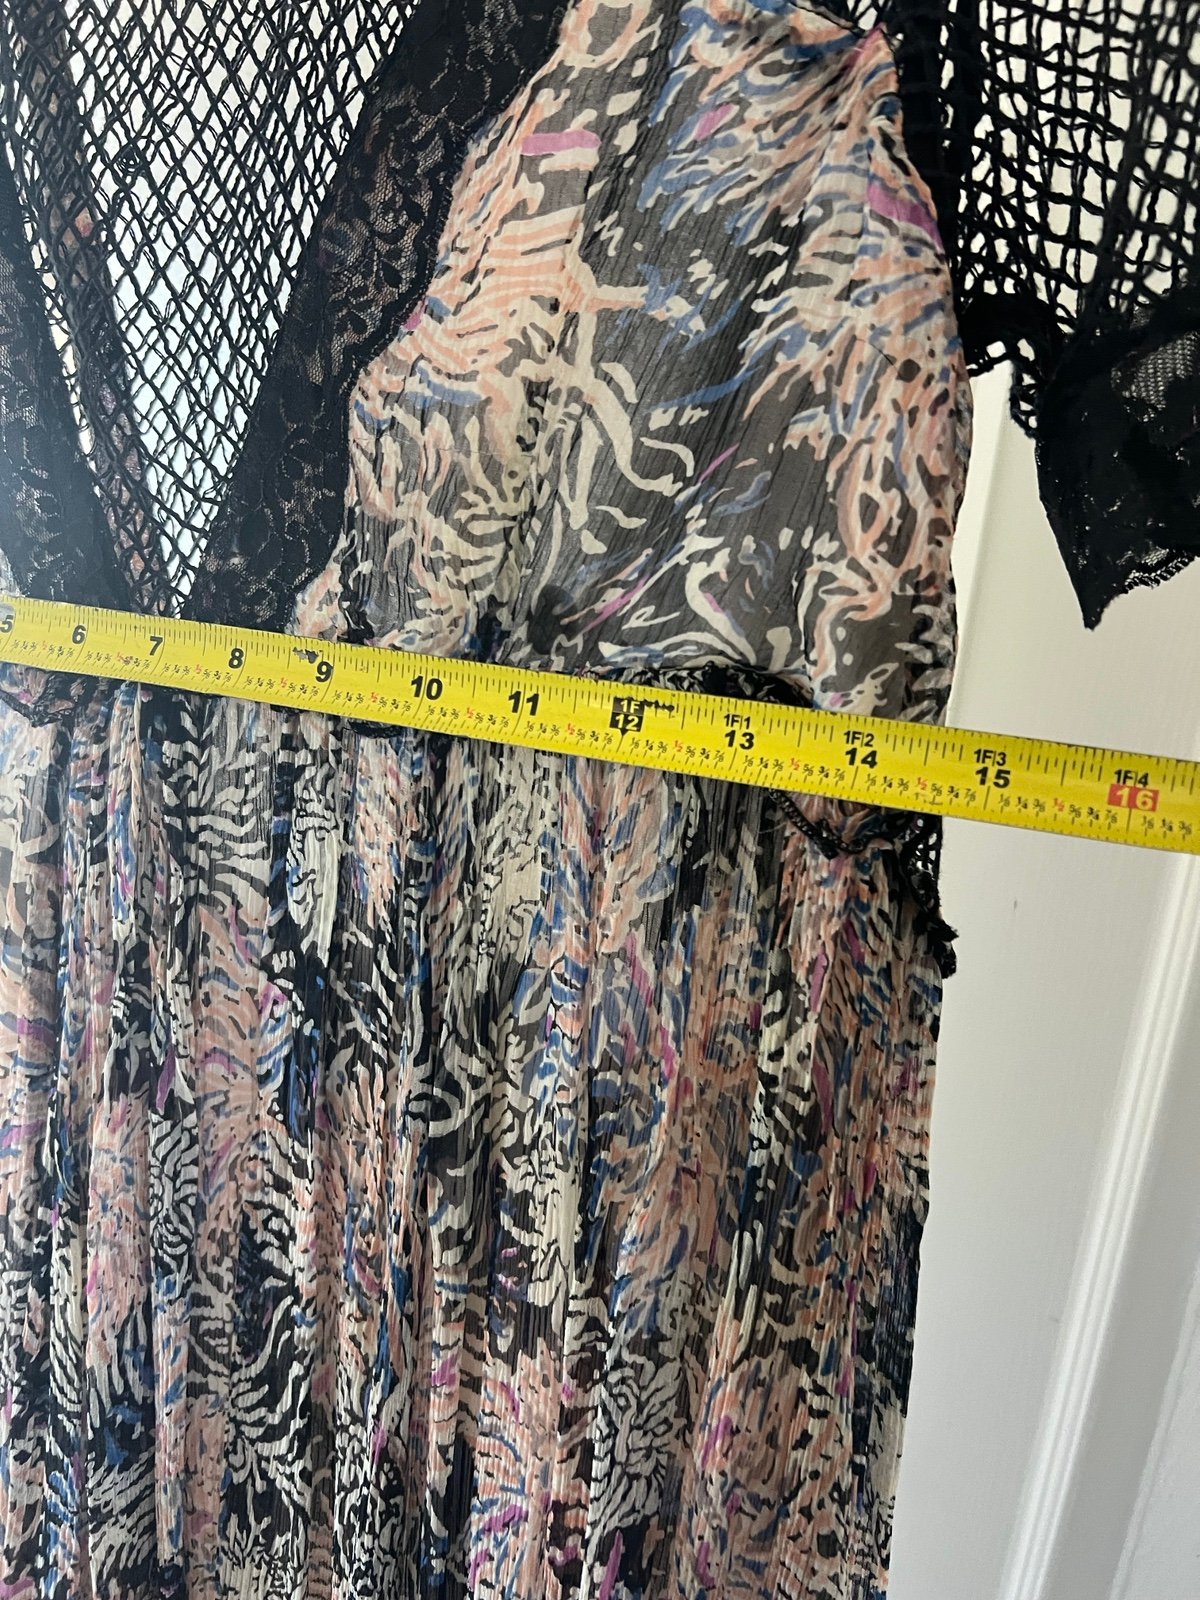 Promotions  Free People maxi dress M KbXP0afc9 well sale